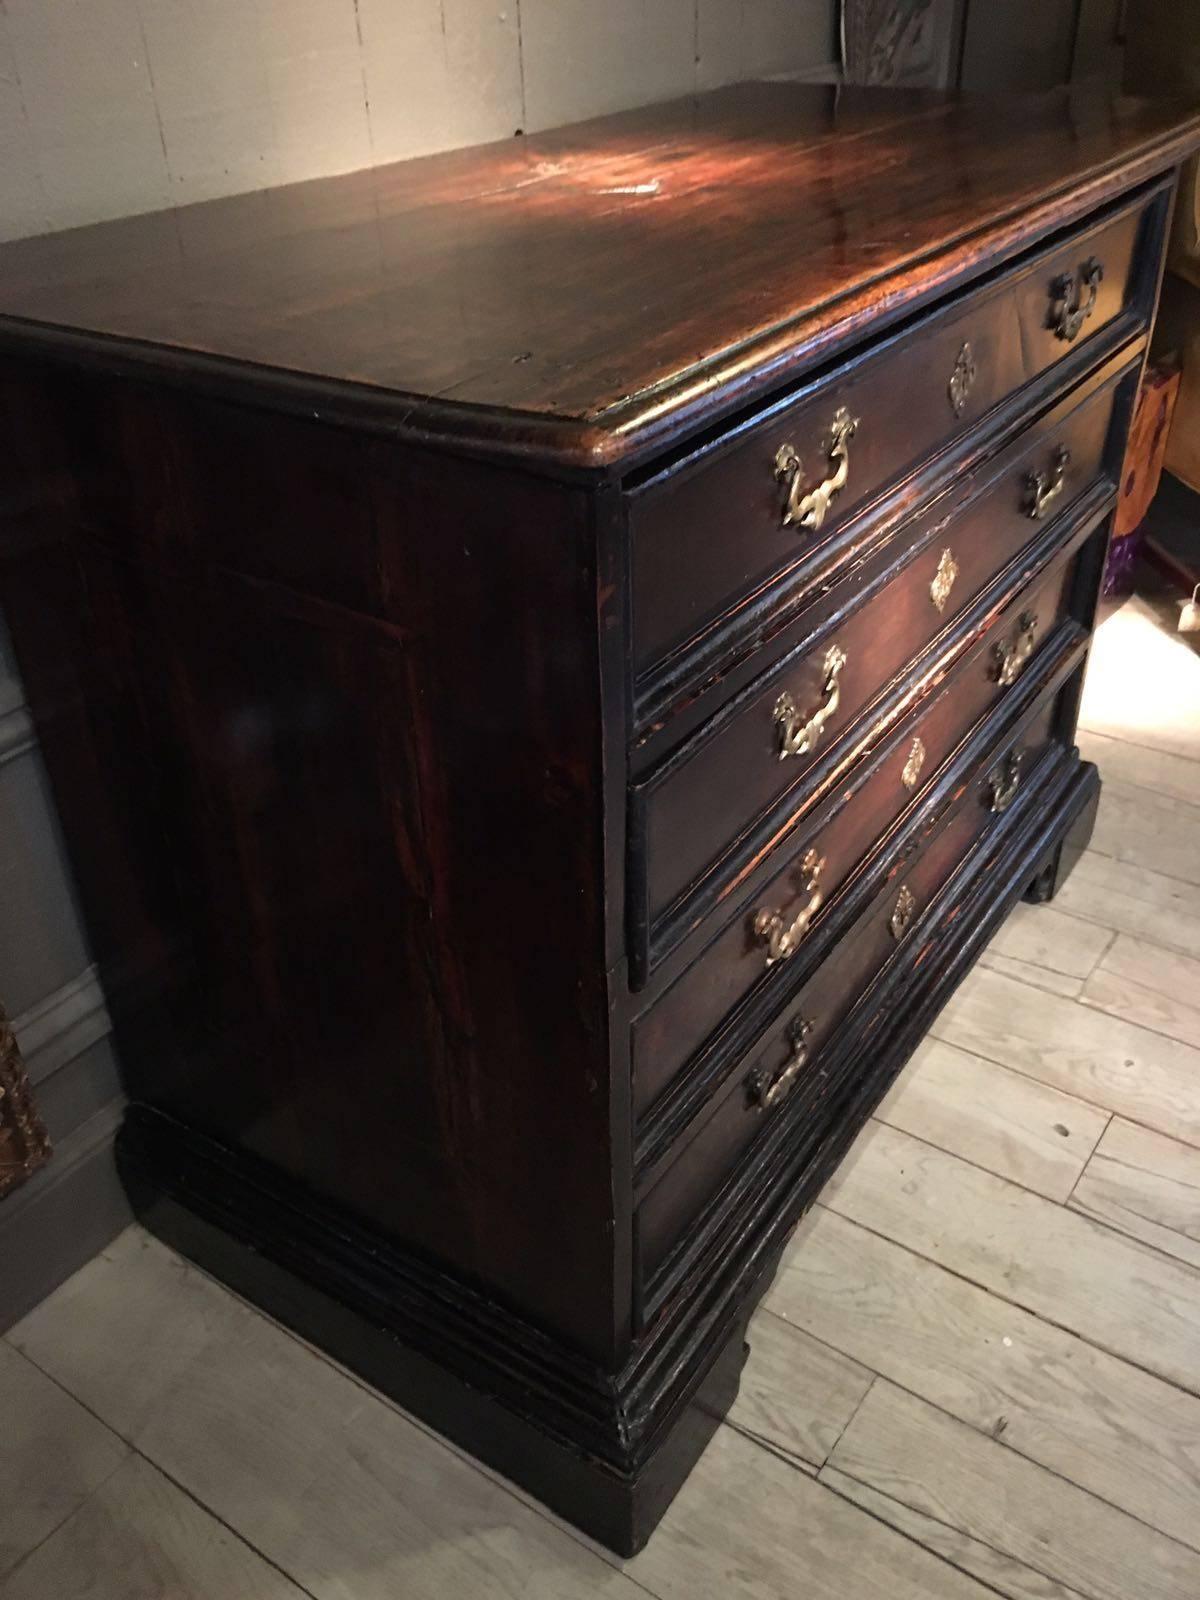 Beautiful Antique Italian Chest of Drawers, Walnut, 18th century,
from Bologna area with beautiful old worn and warm patina and great shine,
very powerful and contemporary piece of furniture by its simplicity in design and lines